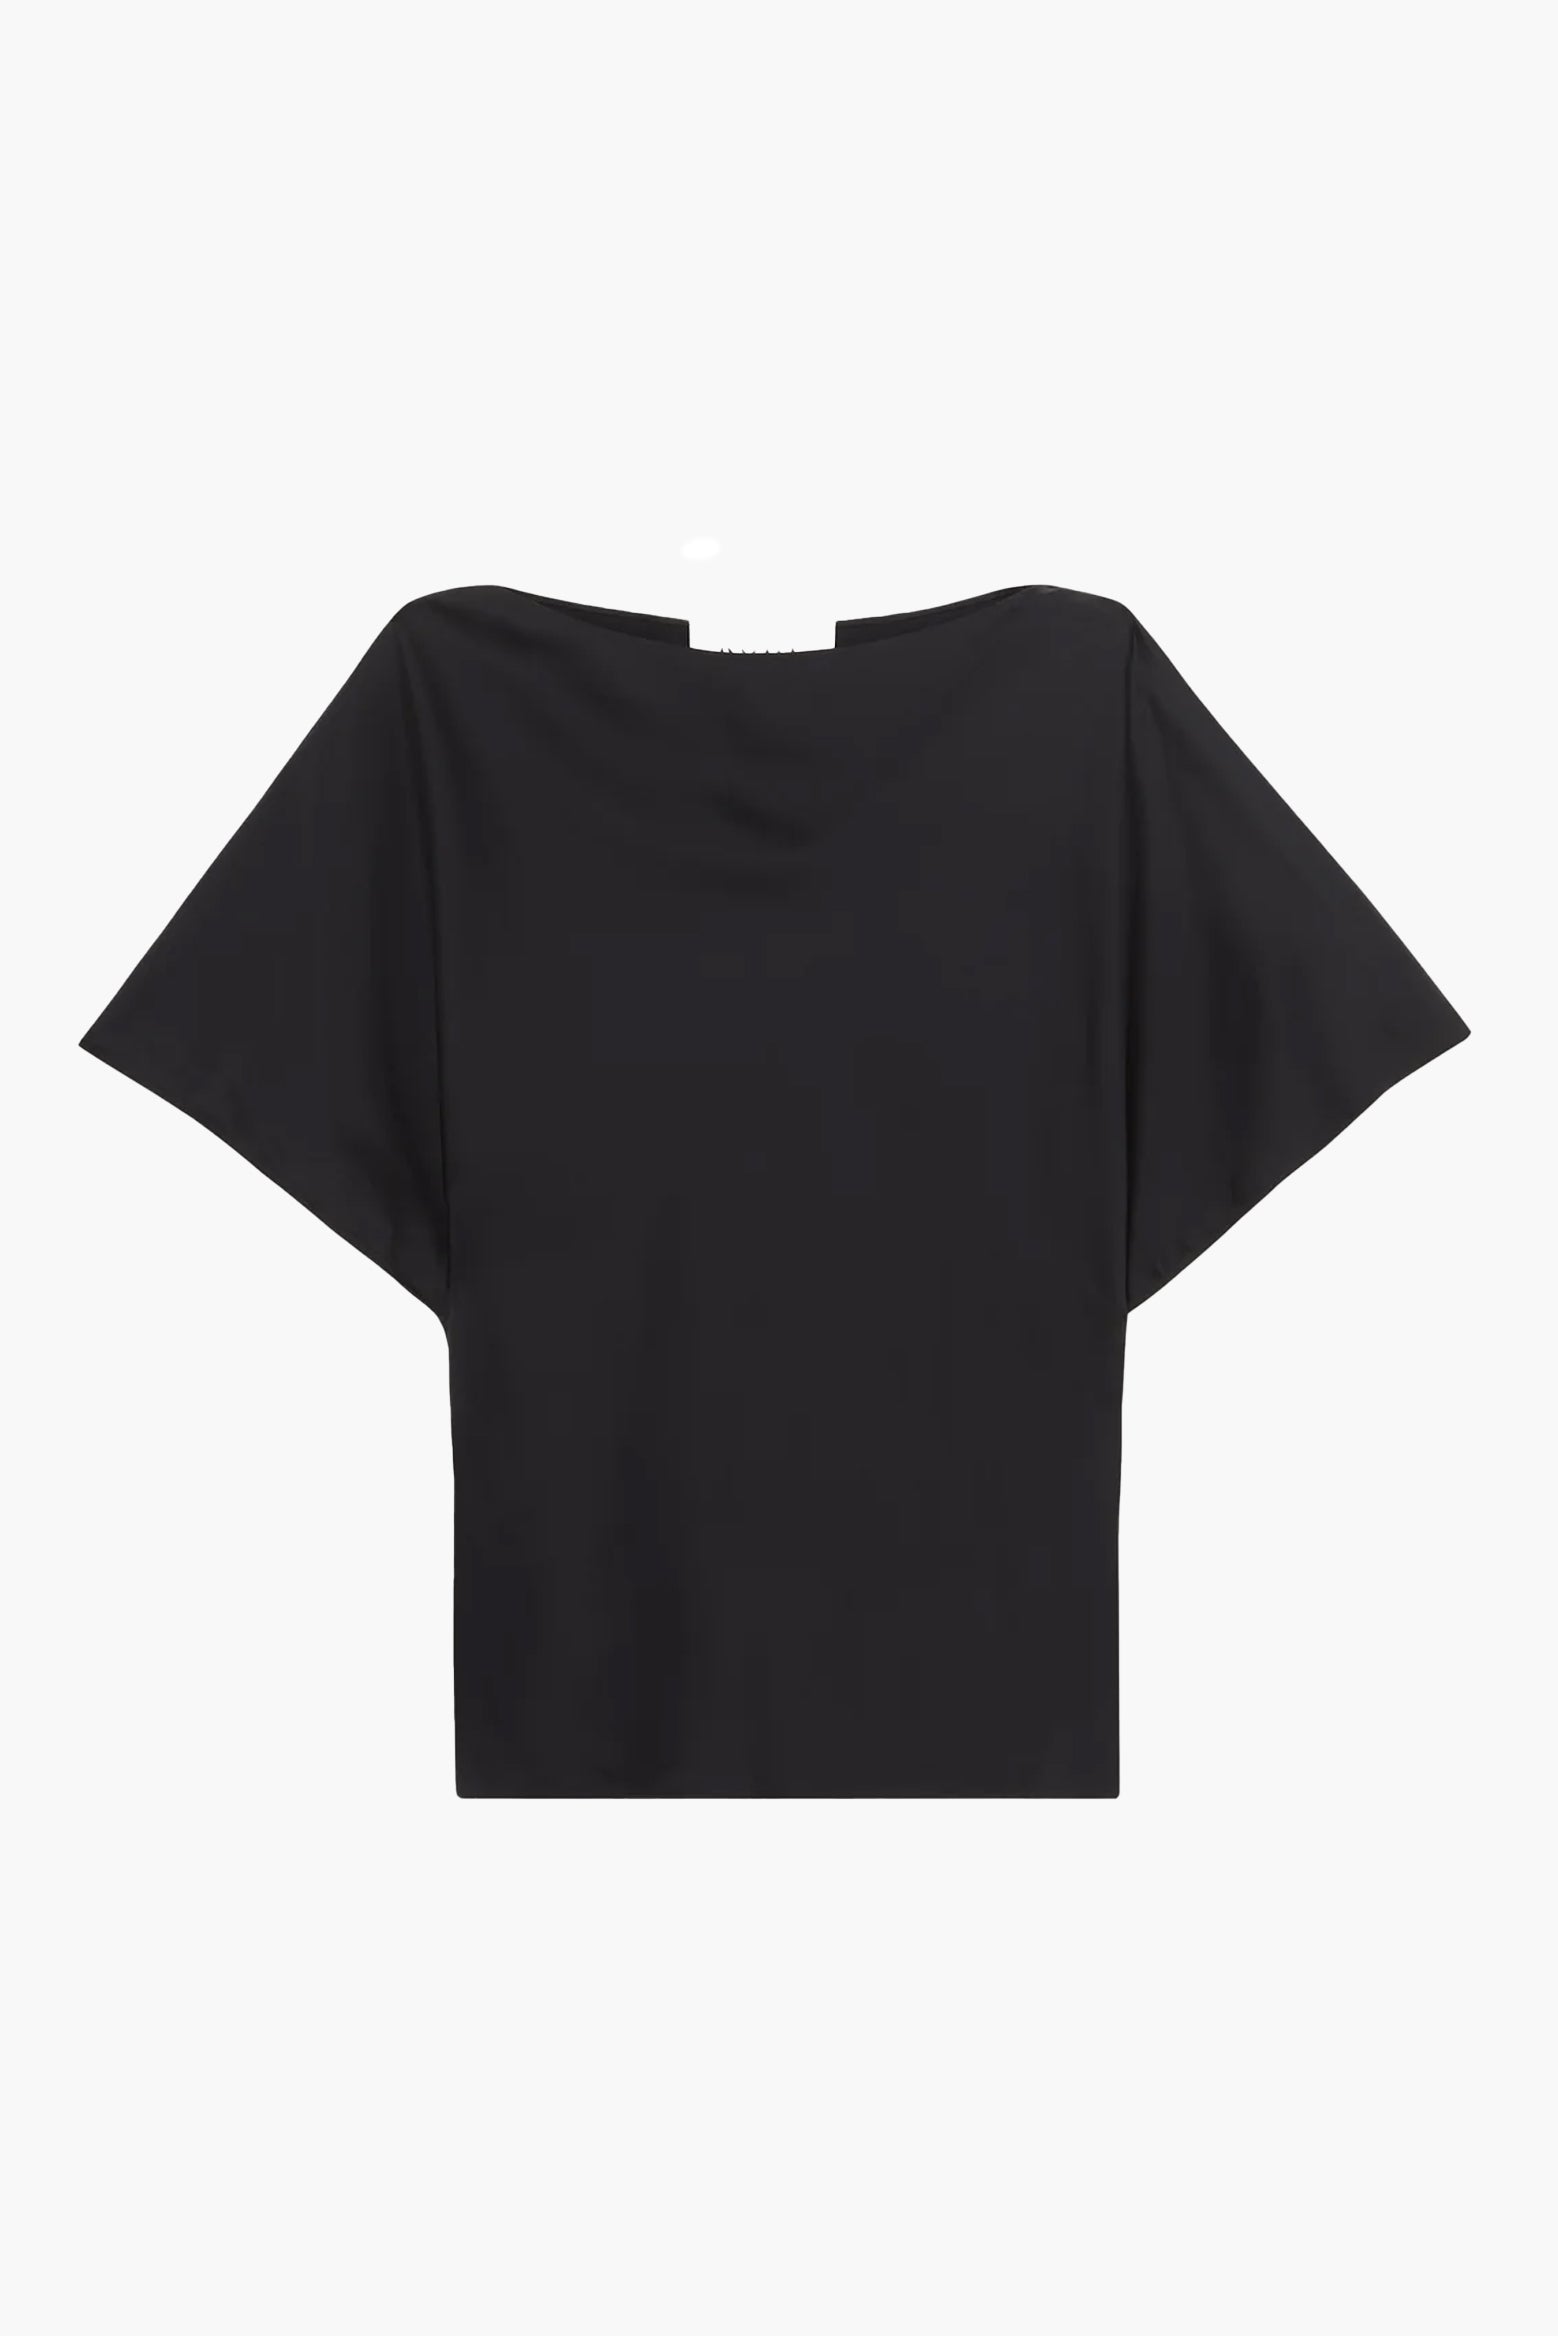 Rohe Fluid Satin Top in Noir available at The New Trend Australia. 